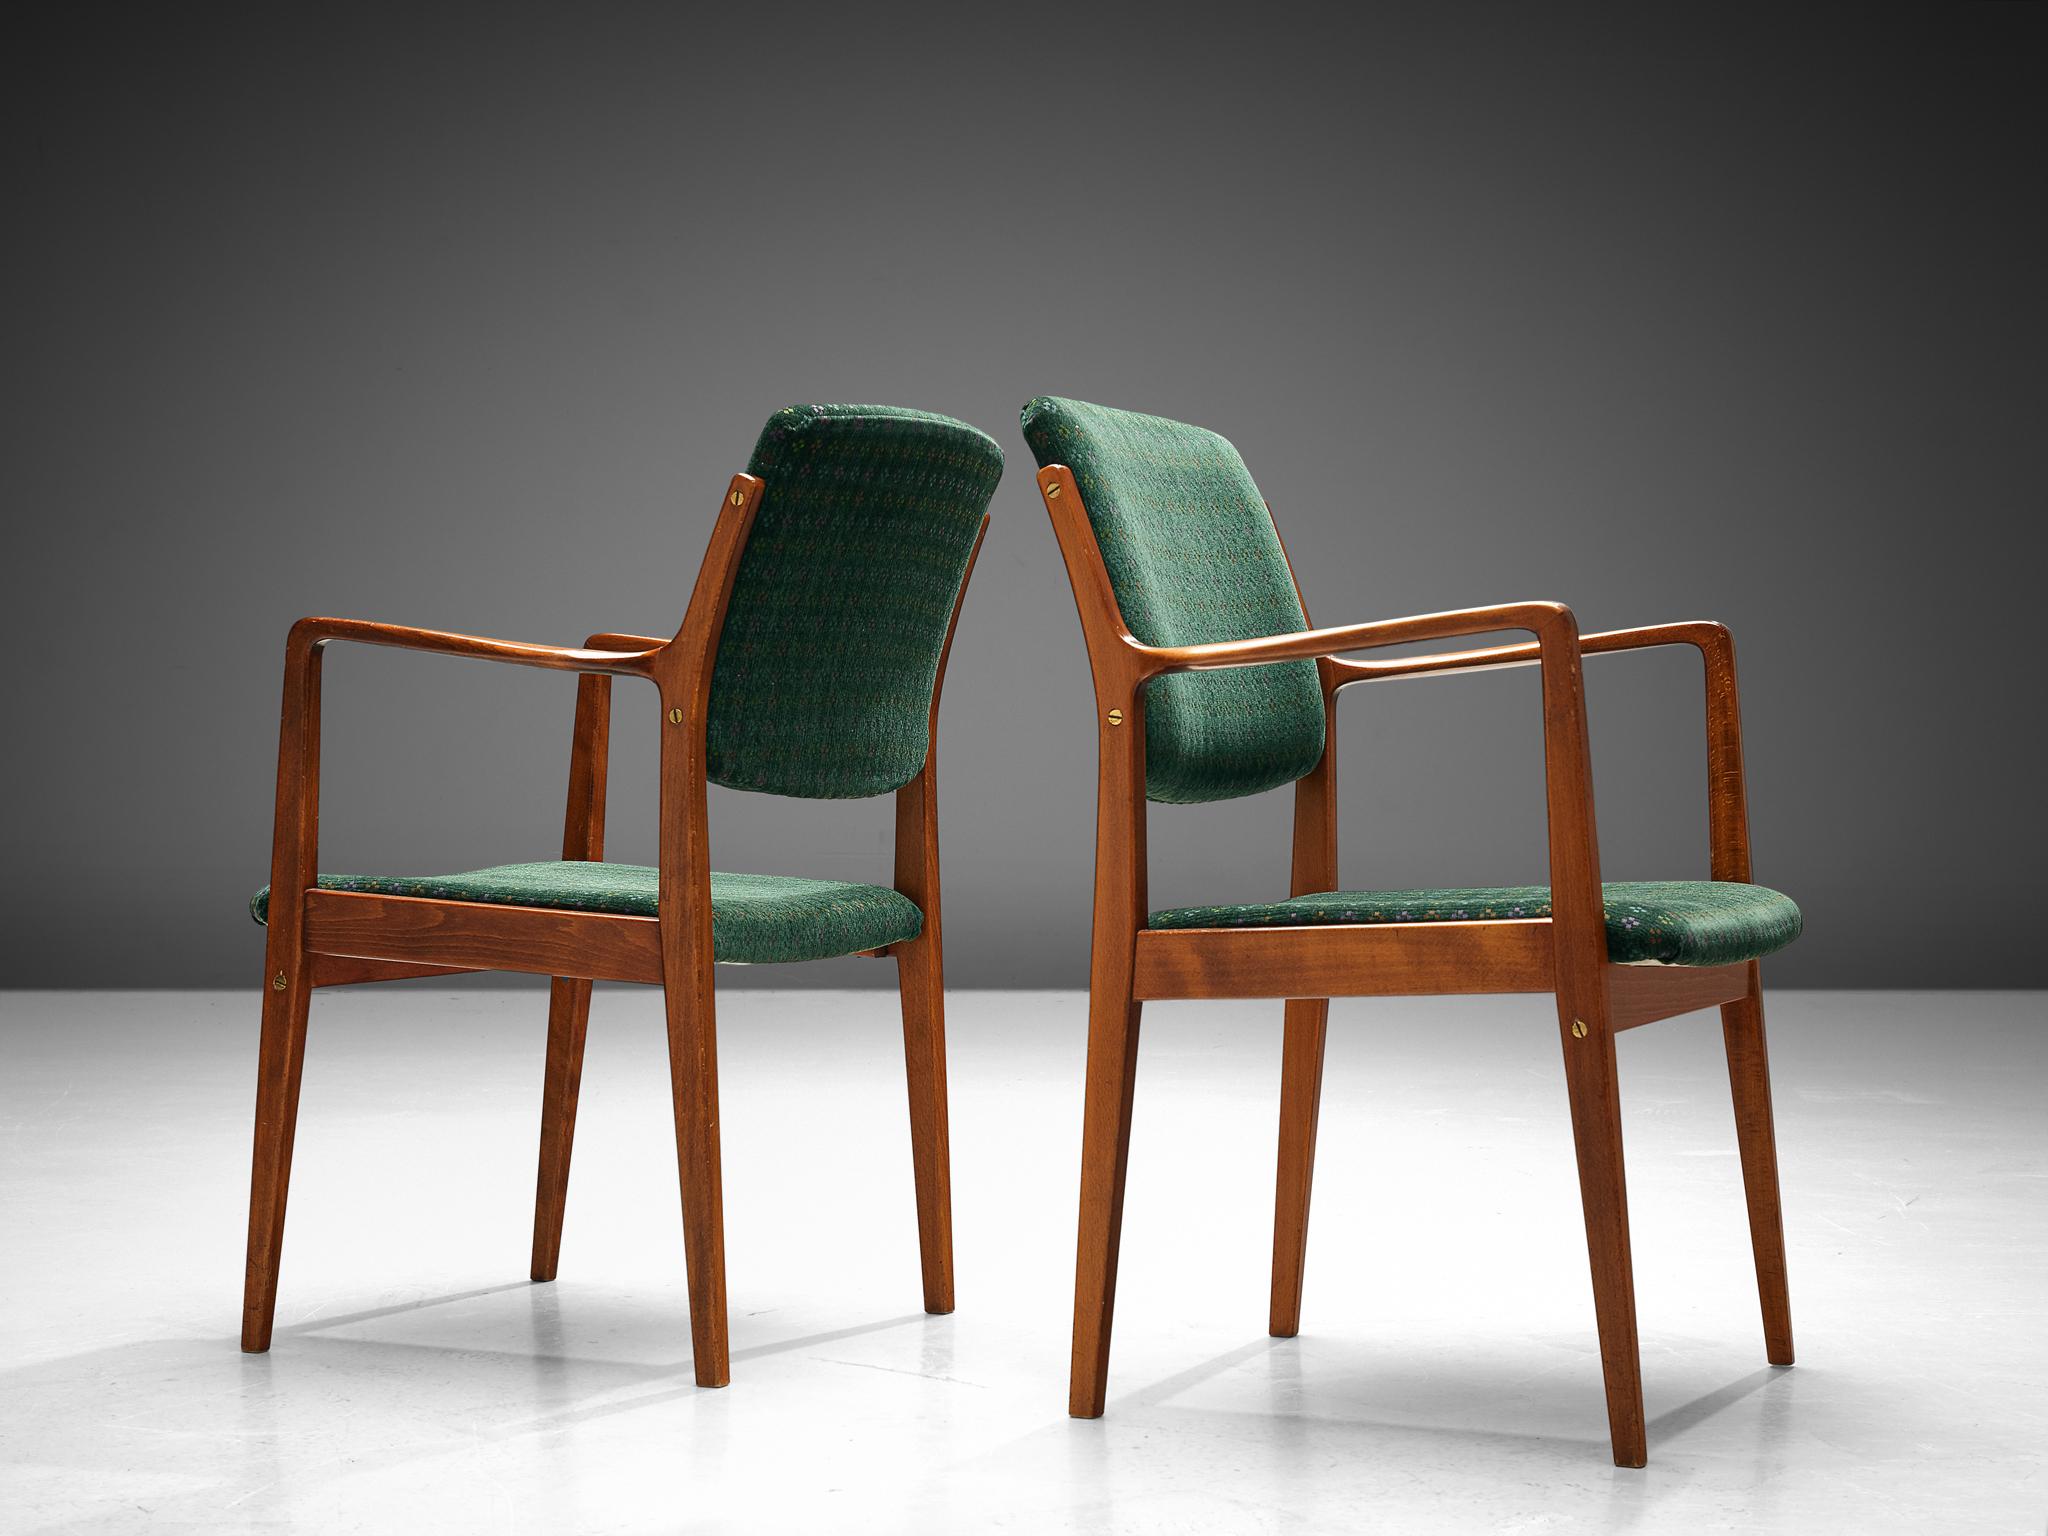 Manufactured by Åtvidabergs Snickerifabrik, pair of dining chairs, brass, teak, fabric, Sweden, 1960s.

These well-preserved solid wood and green velvet upholstered armchairs are in a beautiful condition. The wooden frame of this model is quite